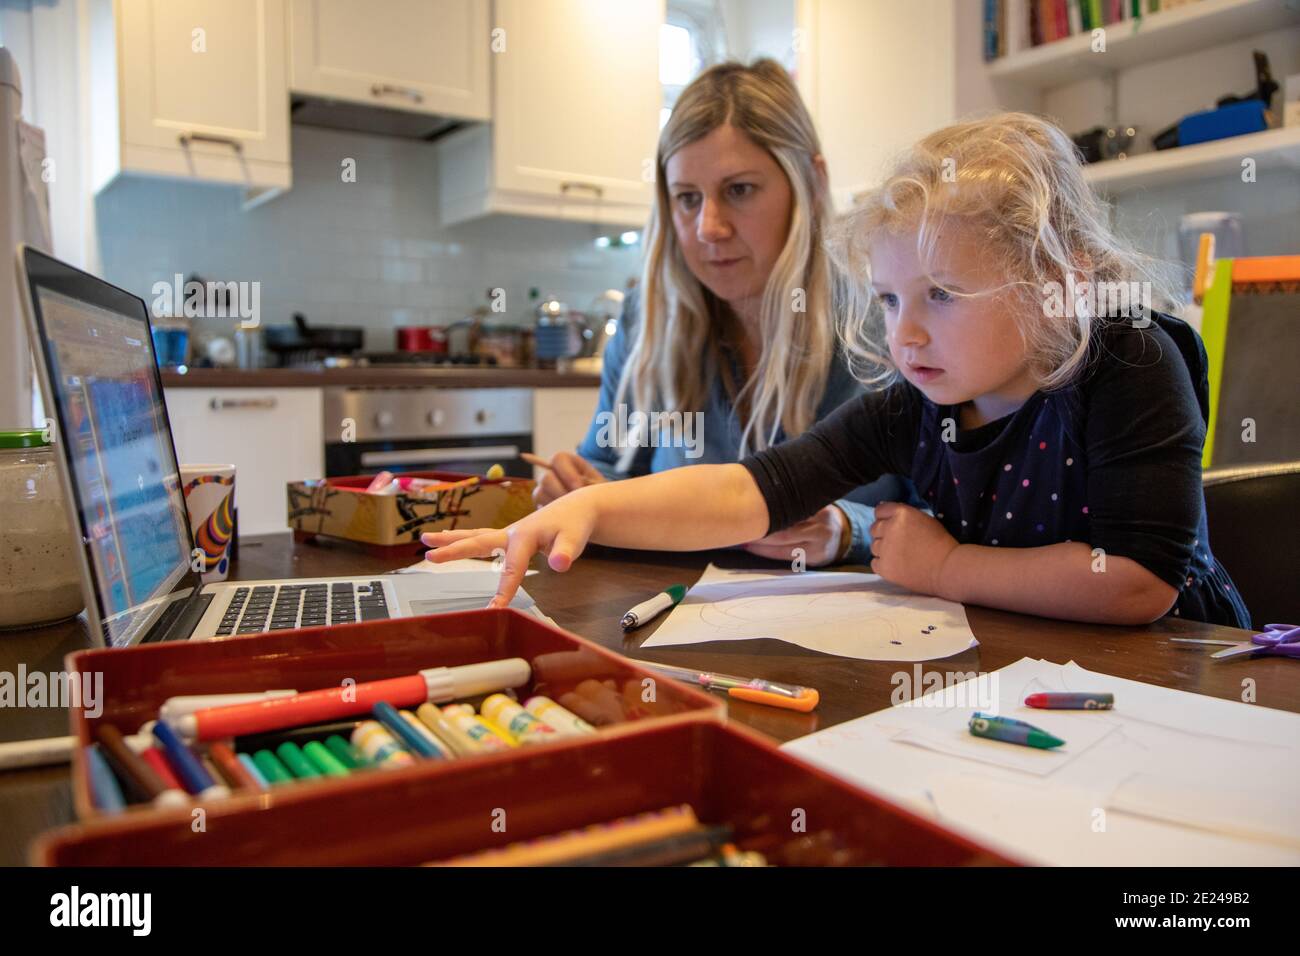 A three year old girl home-learning with her mum using a laptop on the kitchen table. Stock Photo